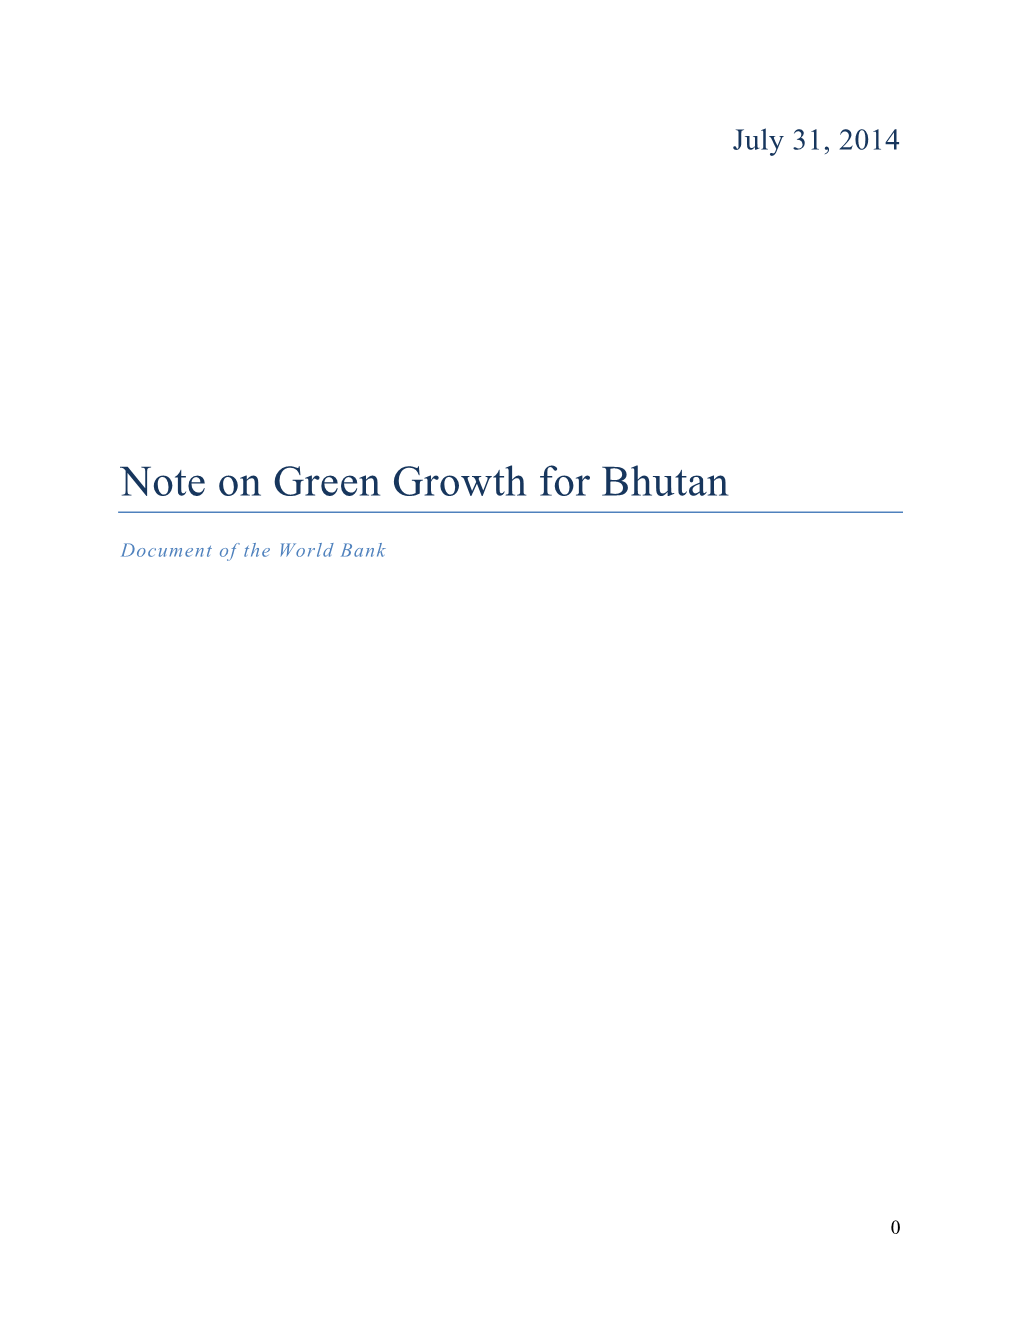 Bhutan Green Growth Policy Note 7.31.14